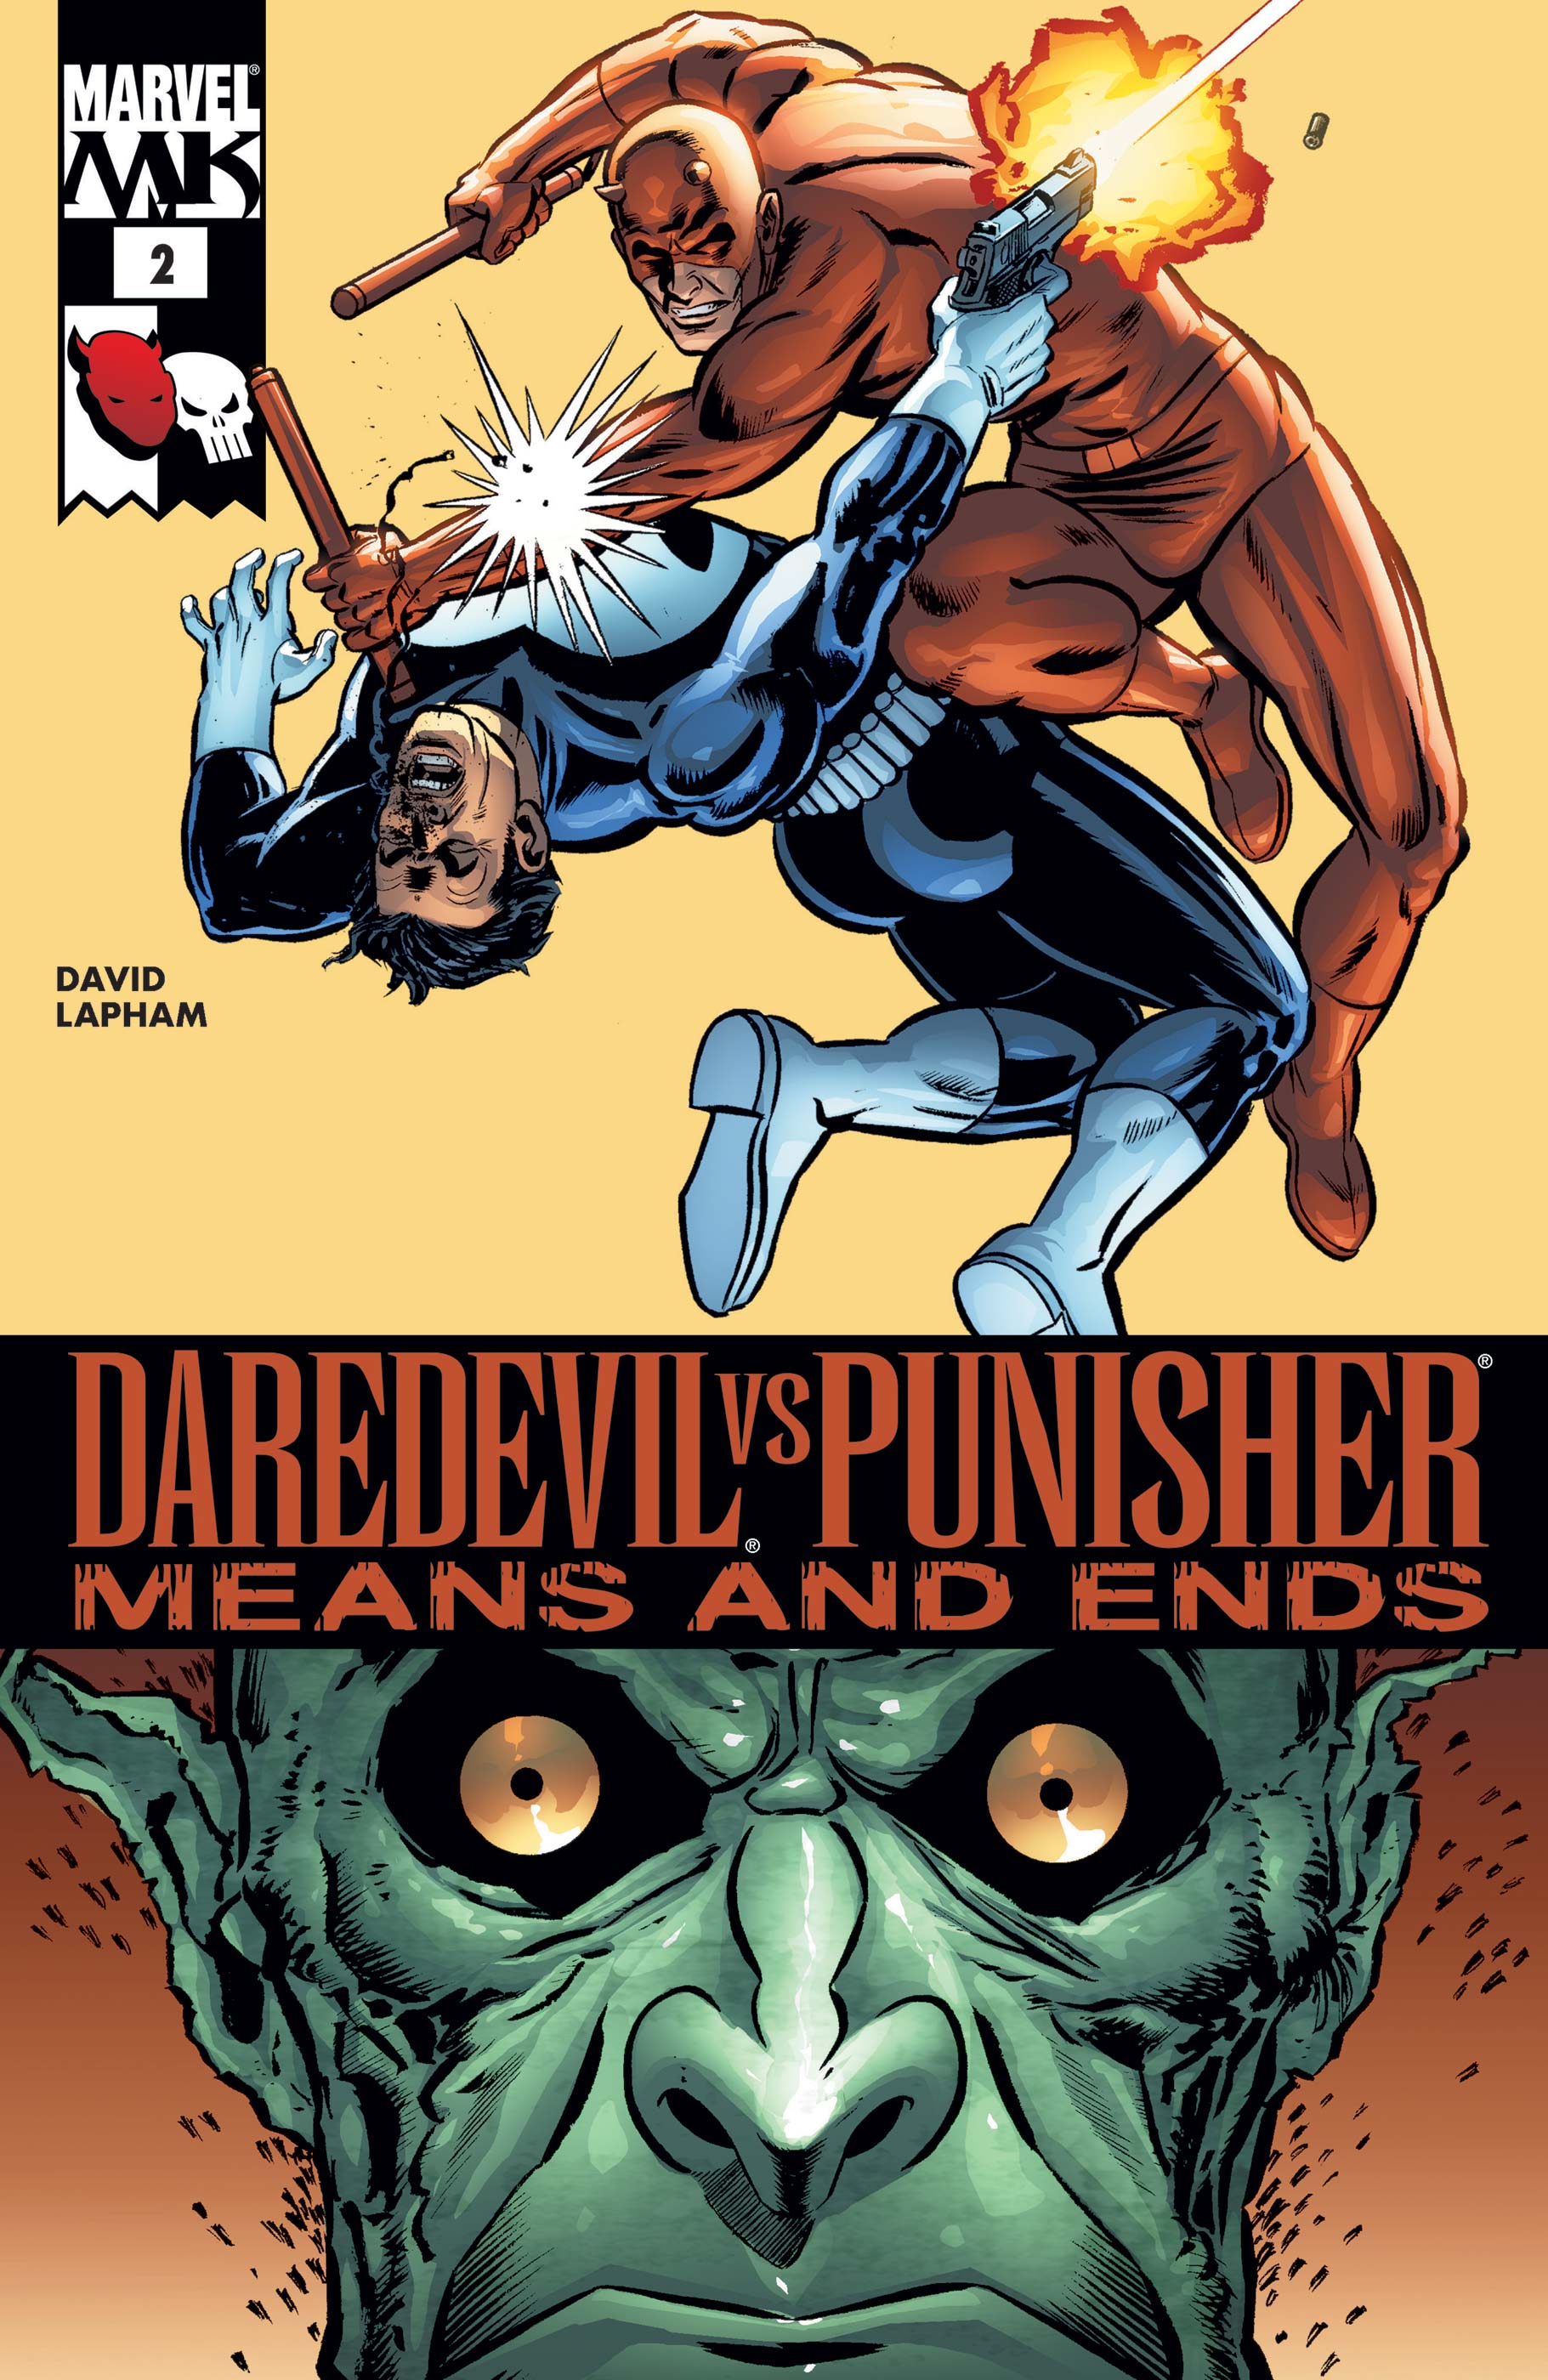 Select Your Issue Punisher Multiple Listings Means and Ends Daredevil vs